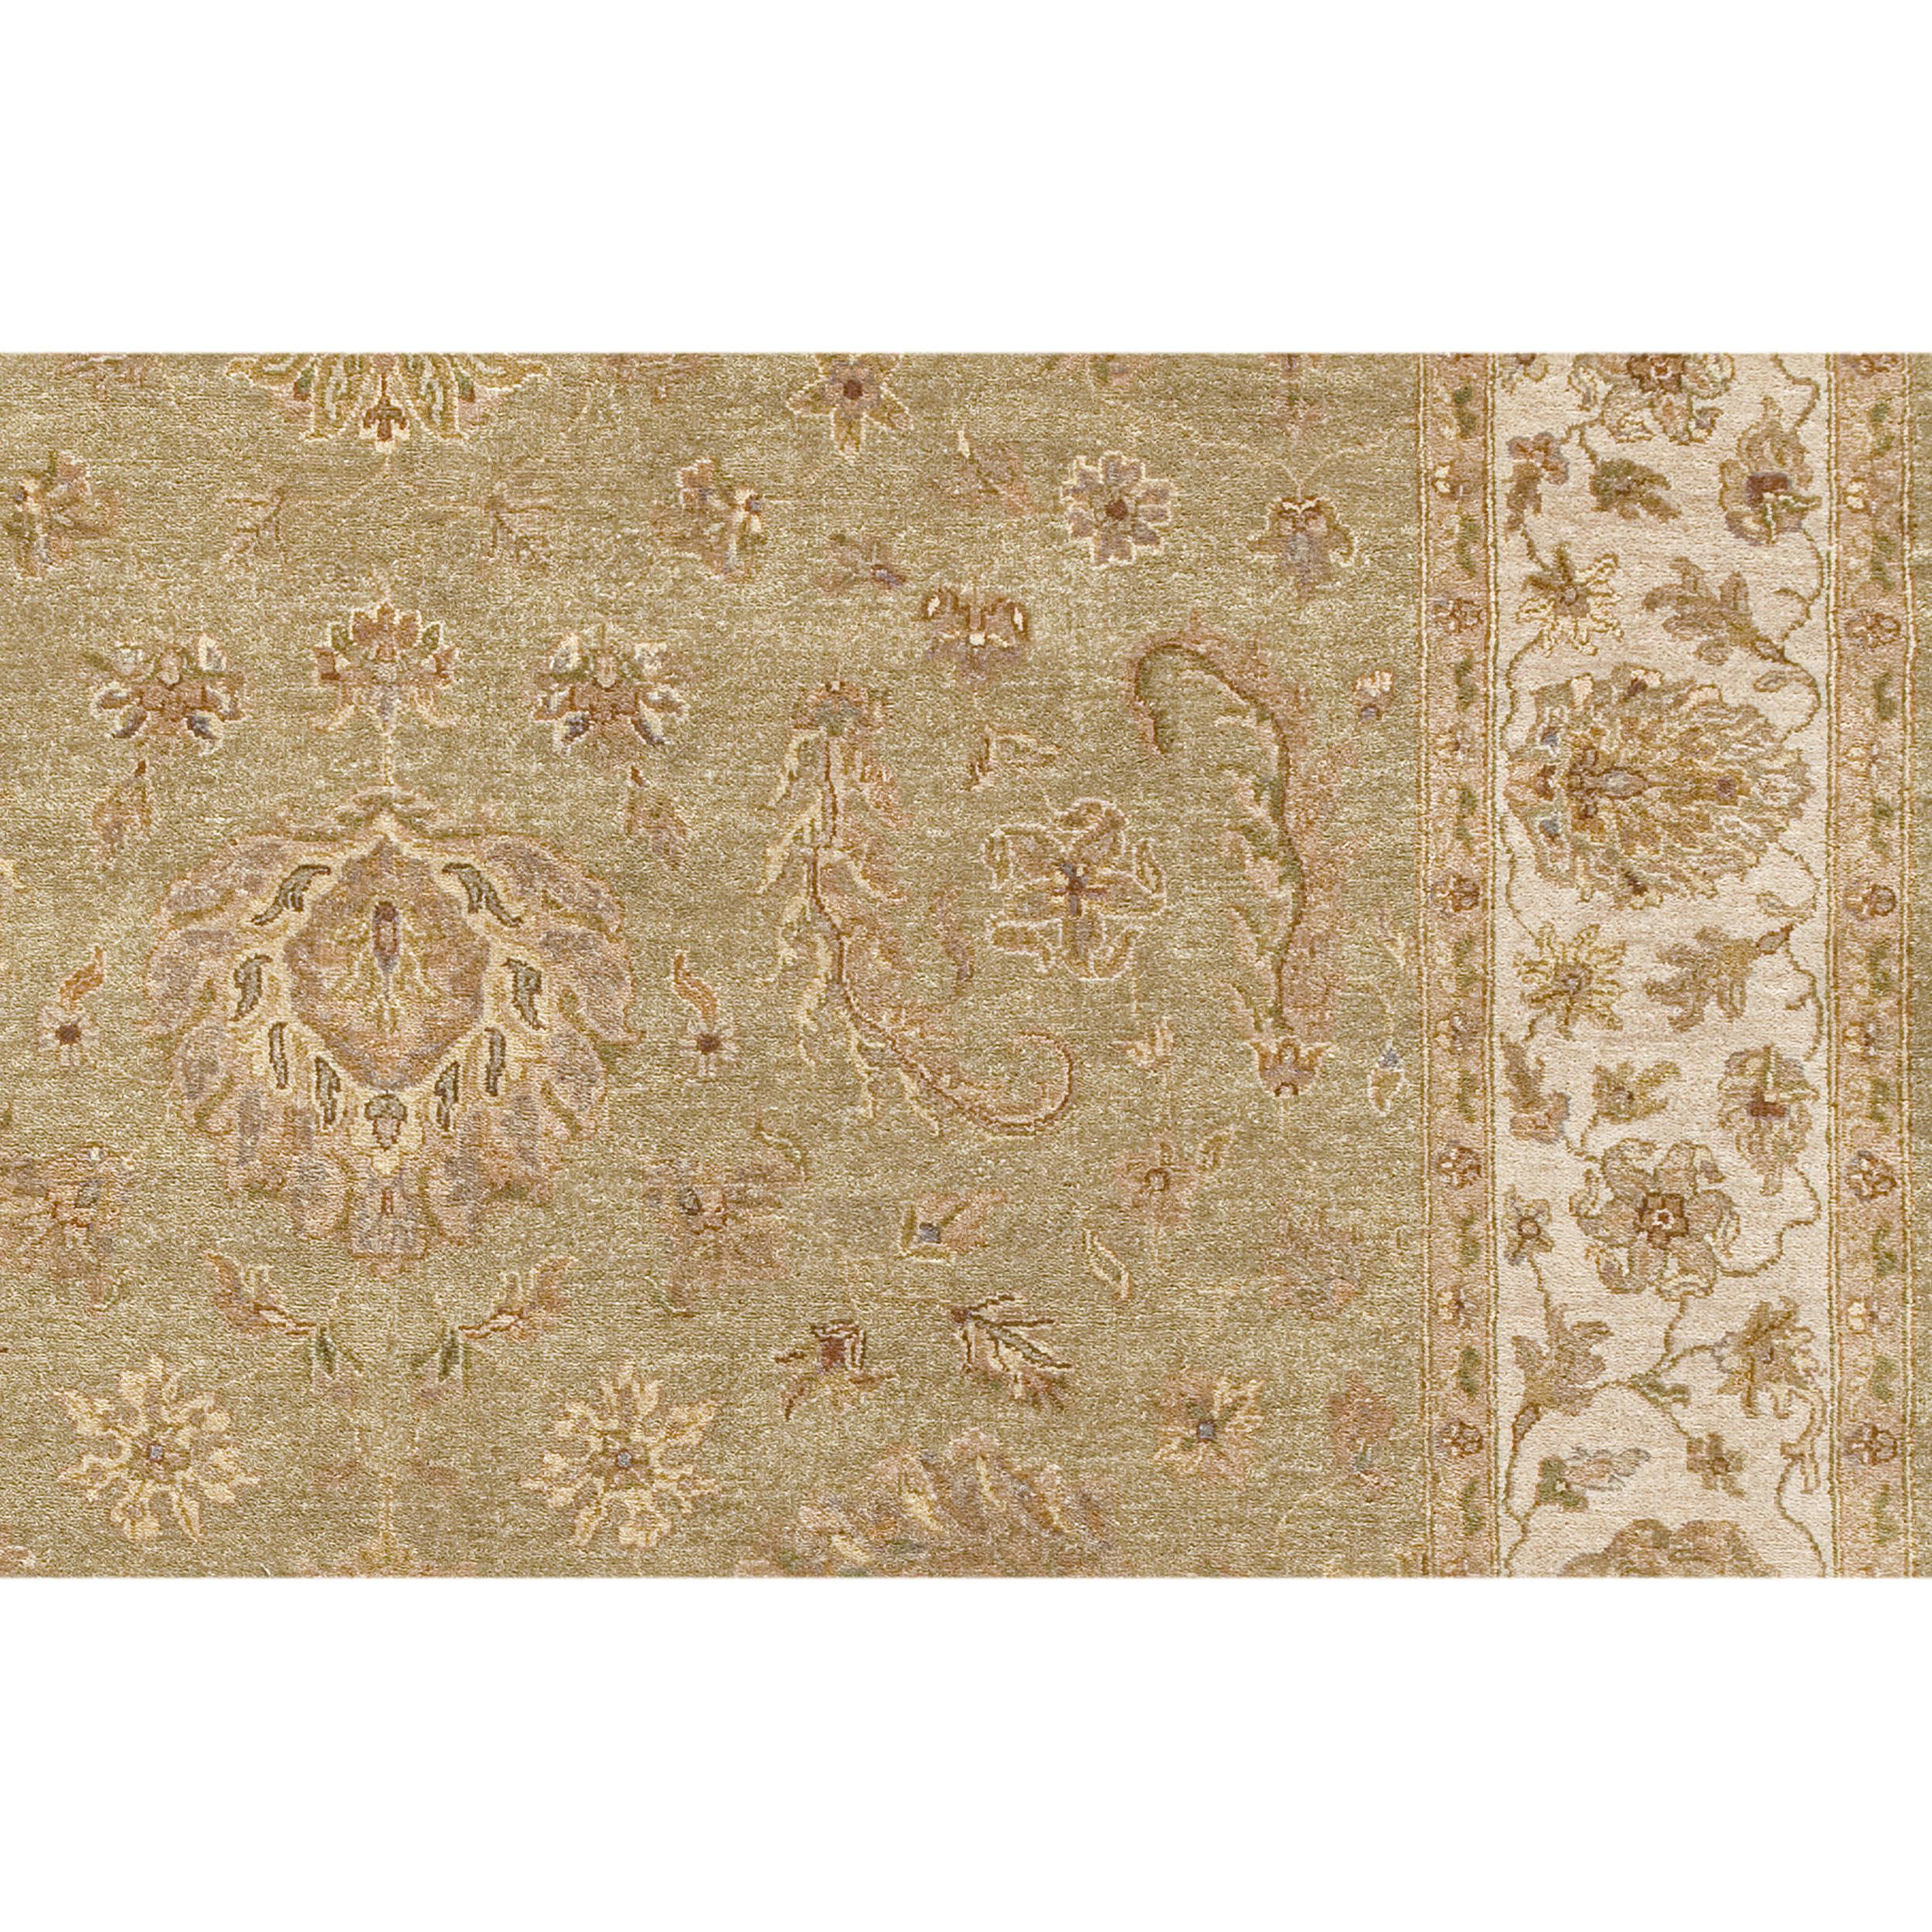 Luxury Traditional Hand-Knotted Amritsar Agra Lt. Green/Ivory 10x14 Rug In New Condition For Sale In Secaucus, NJ